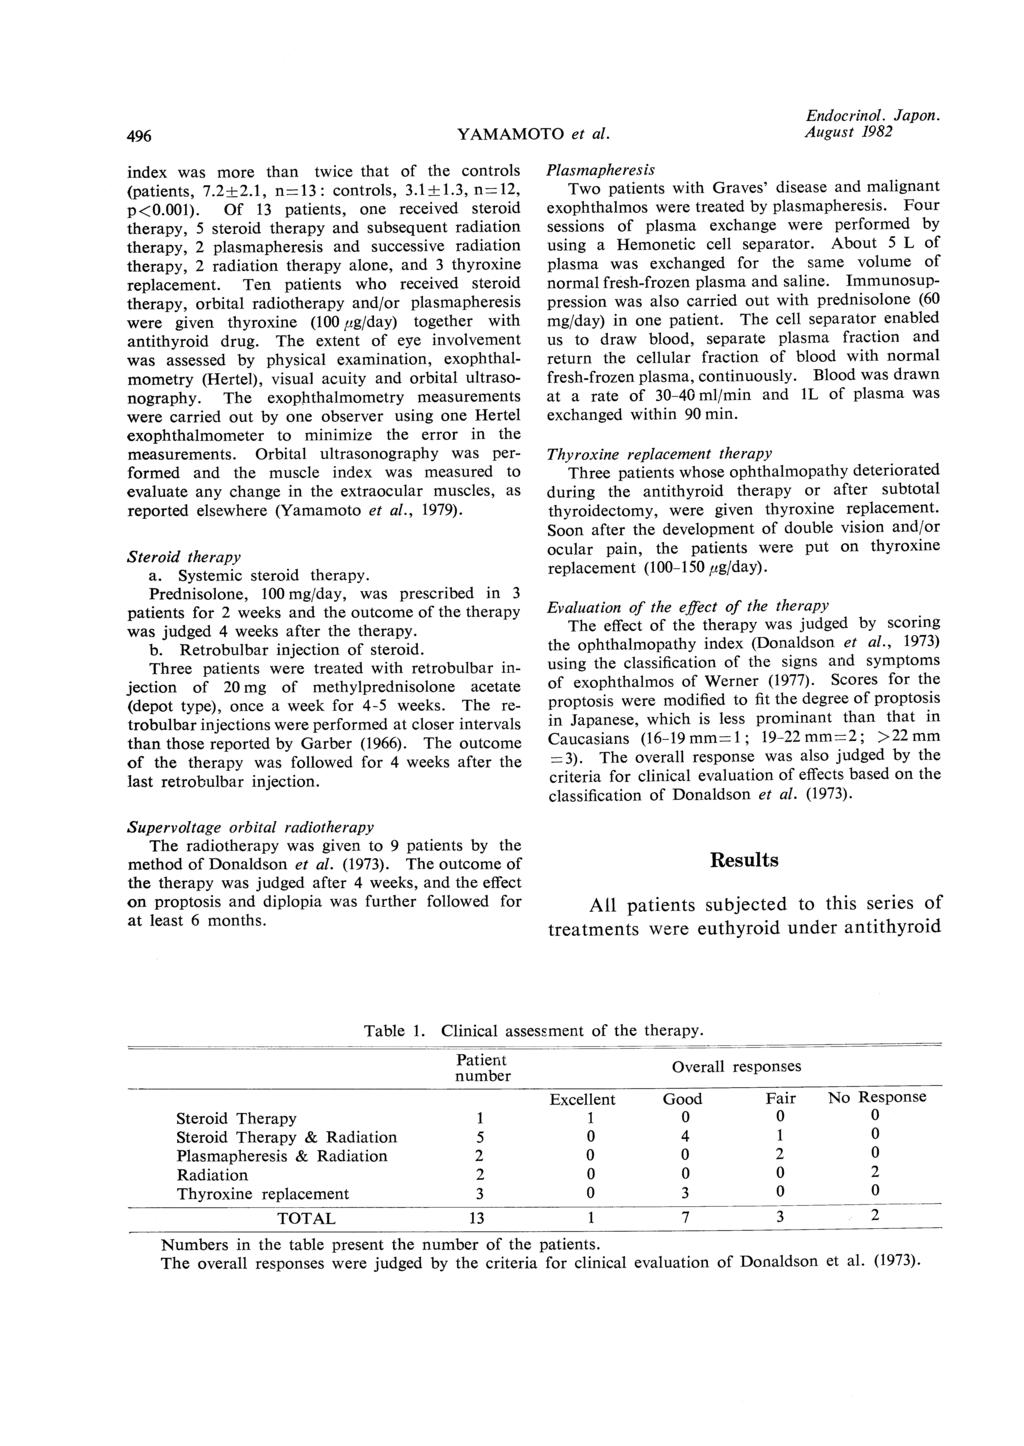 496 YAMAMOTO et al. Endocrinol. Japon. August 1982 index was more than twice that of the controls (patients, 7.2 }2.1, n=13: controls, 3.1 }1.3, n=12, p<0.001).